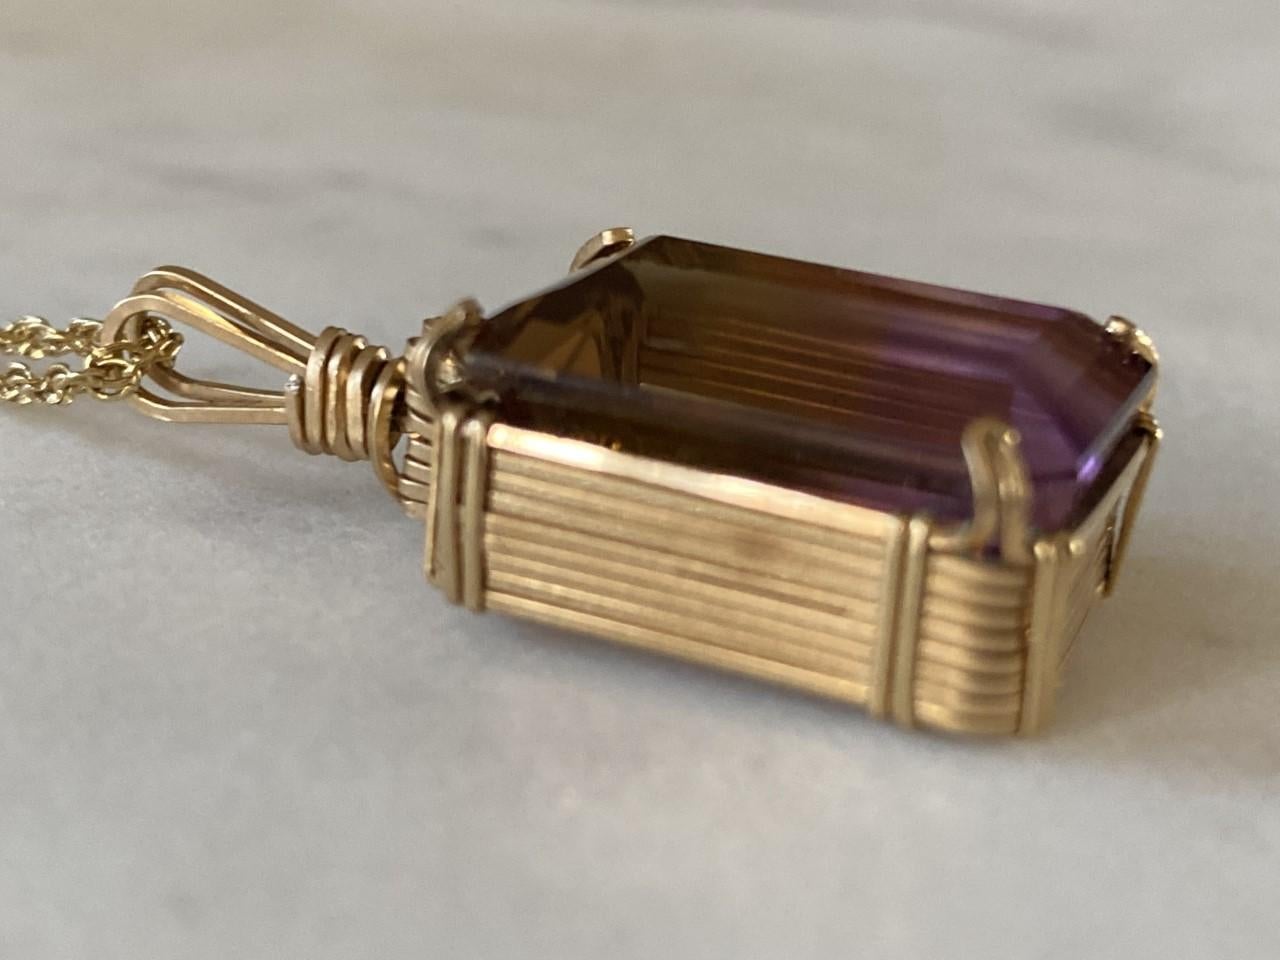 Crafted in the 1950s from 14kt yellow gold, this vintage necklace features a large emerald-cut purple ametrine (a combination of an amethyst and a citrine) pendant measuring 20mm x 15mm. The chain measures 18 inches long. The ametrine is encased in